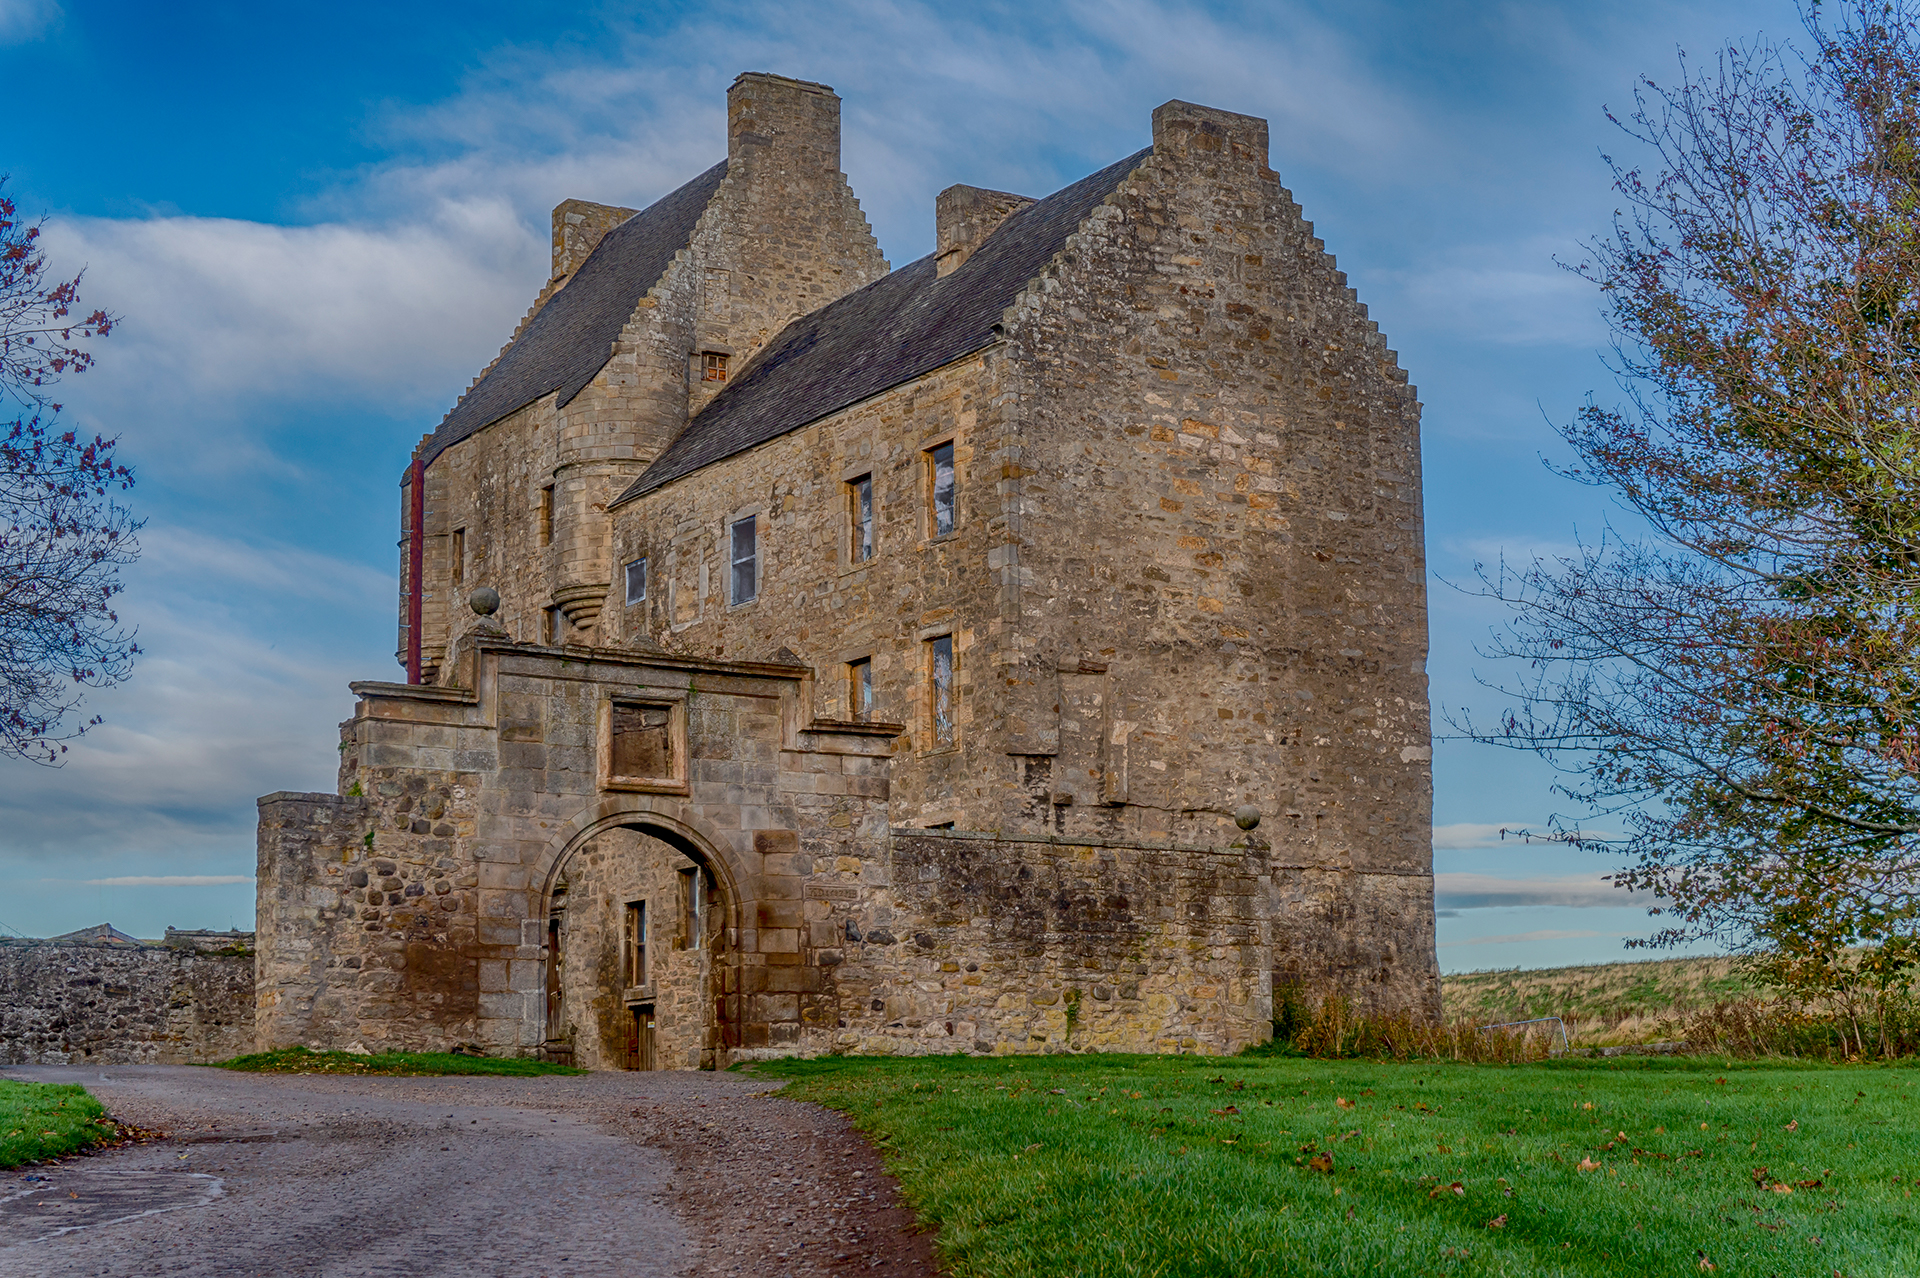 This is Midhope Castle, West Lothian, better known as Outlander's Lallybroch.